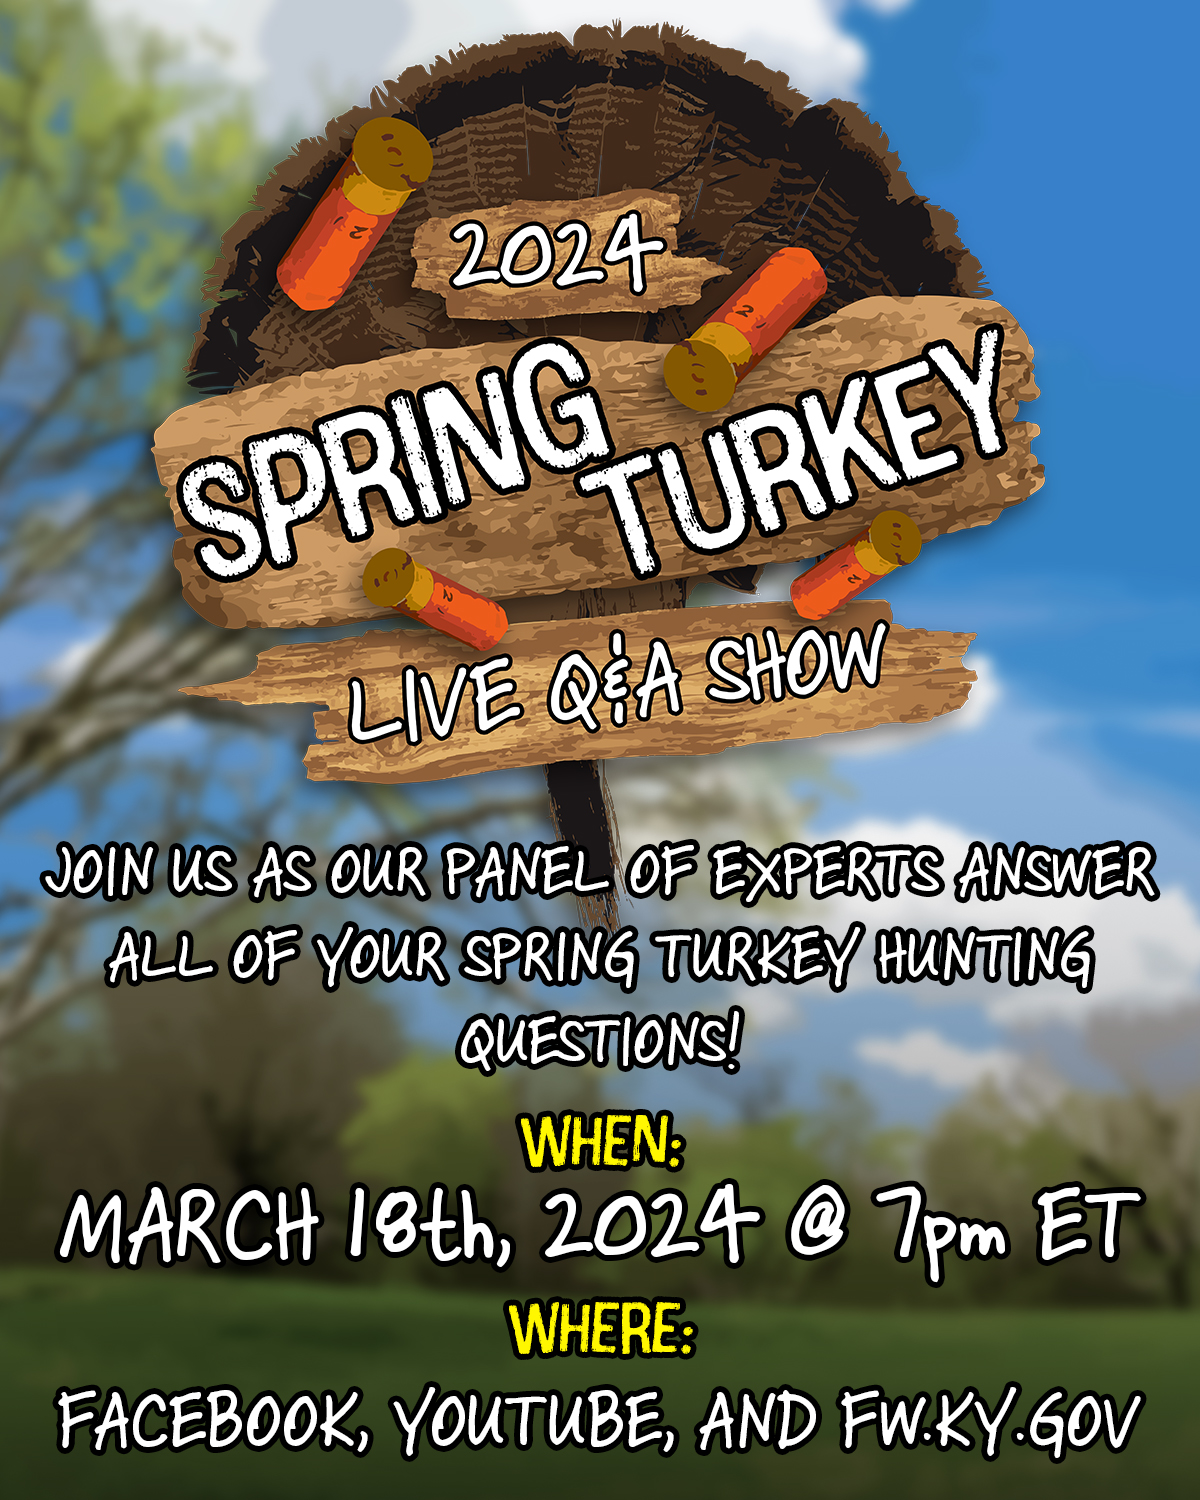 Spring Turkey Live Q&A Show. Join us as our Panel of experts answer all of your spring turkey hunting questions. March 18, 2024 at 7pm et on Facebook, Youtube, and FW.KY.gov